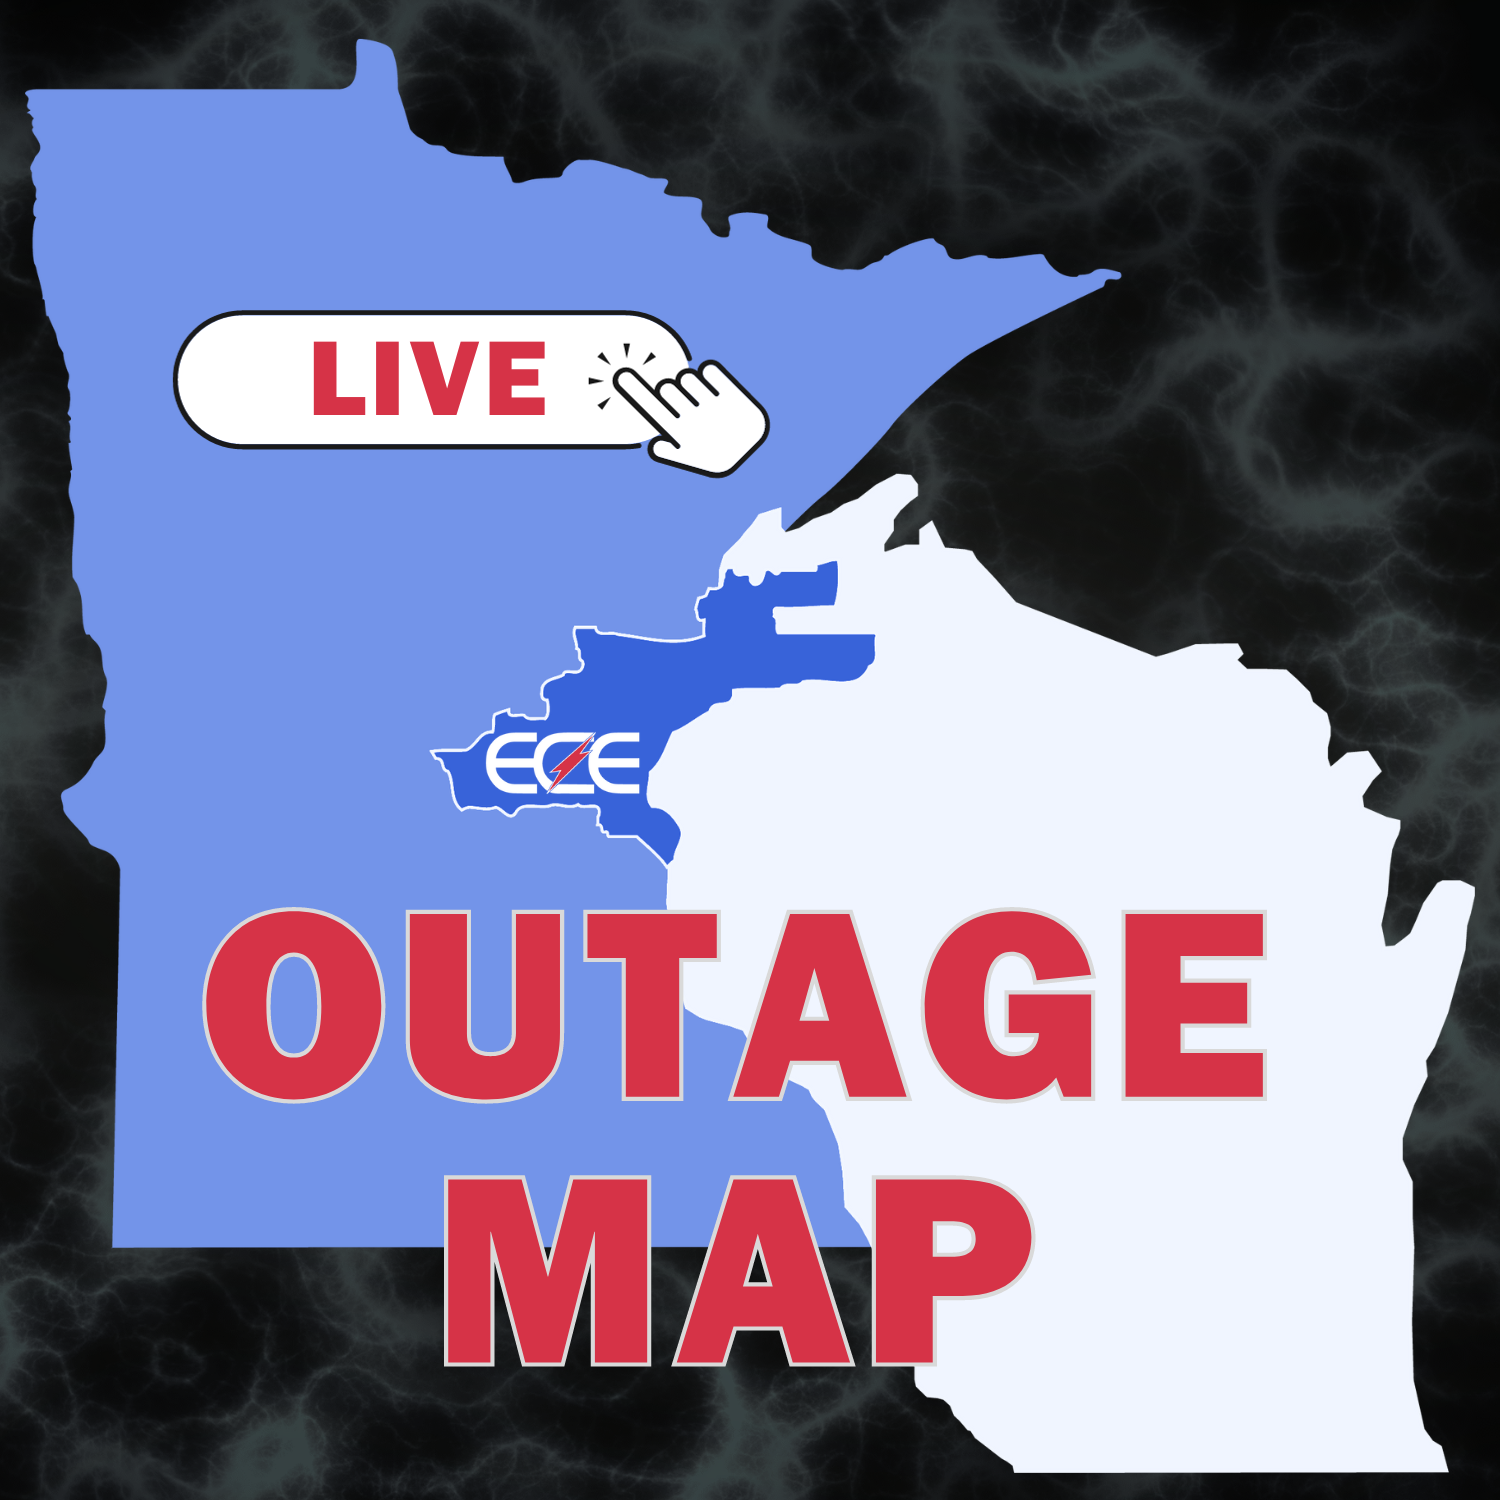 Live outage map